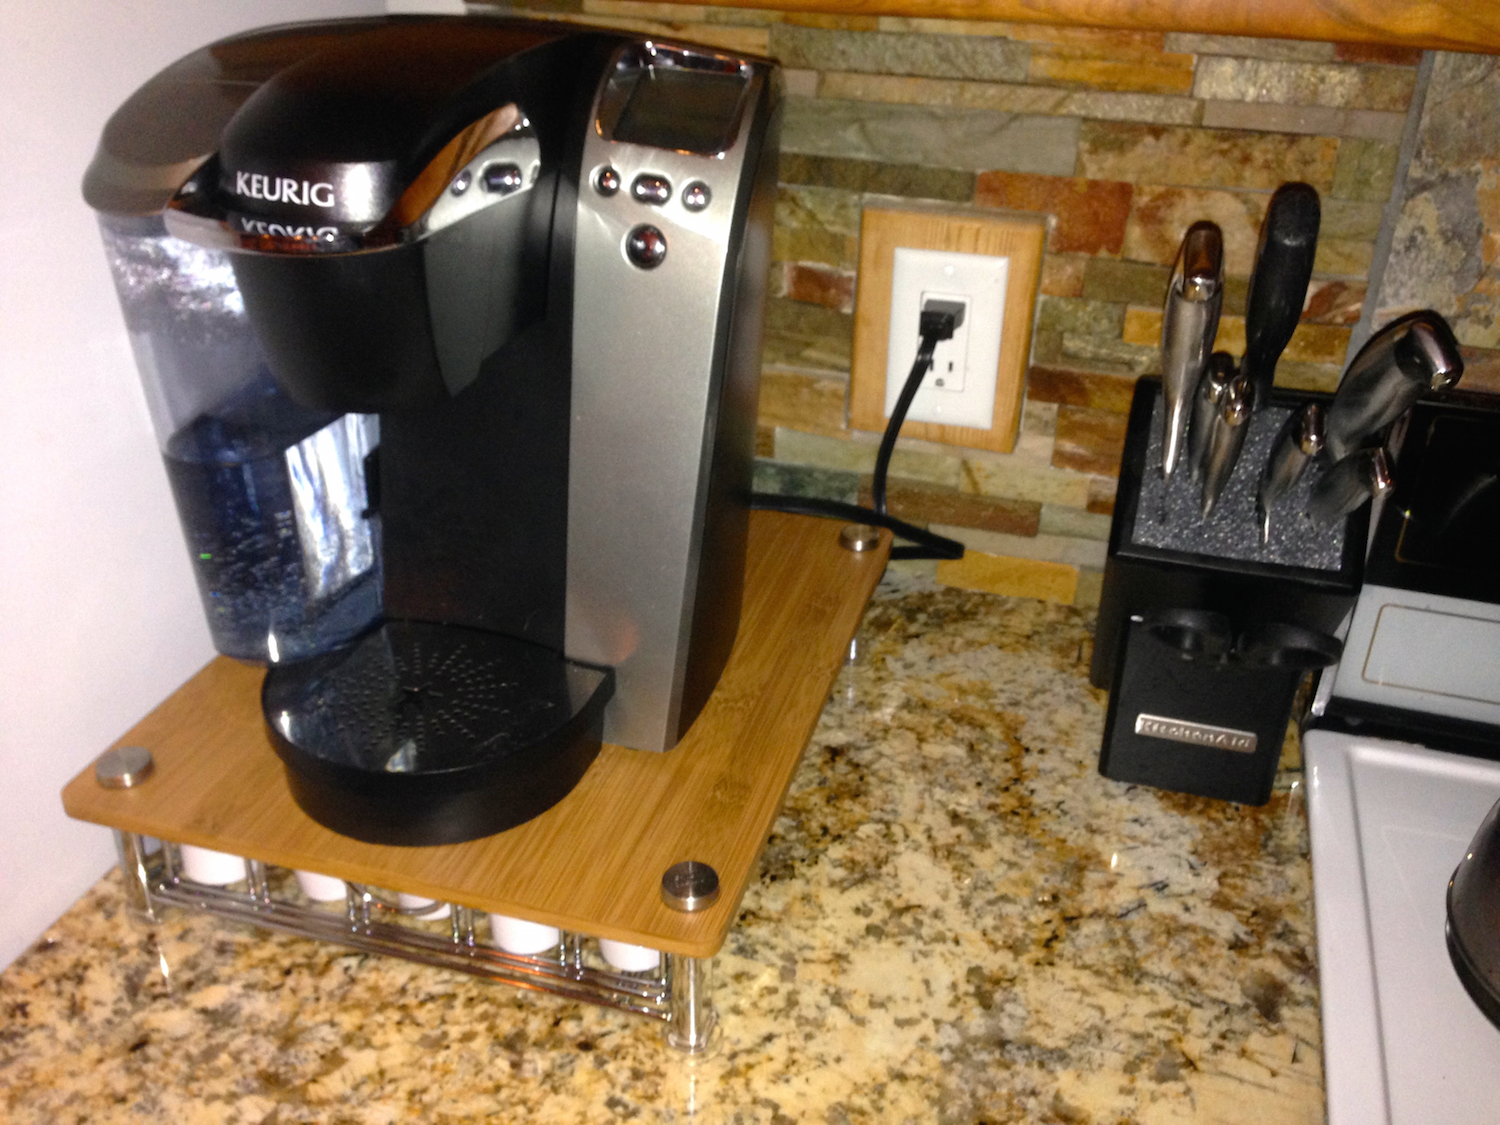  Keurig coffee maker and knives. 